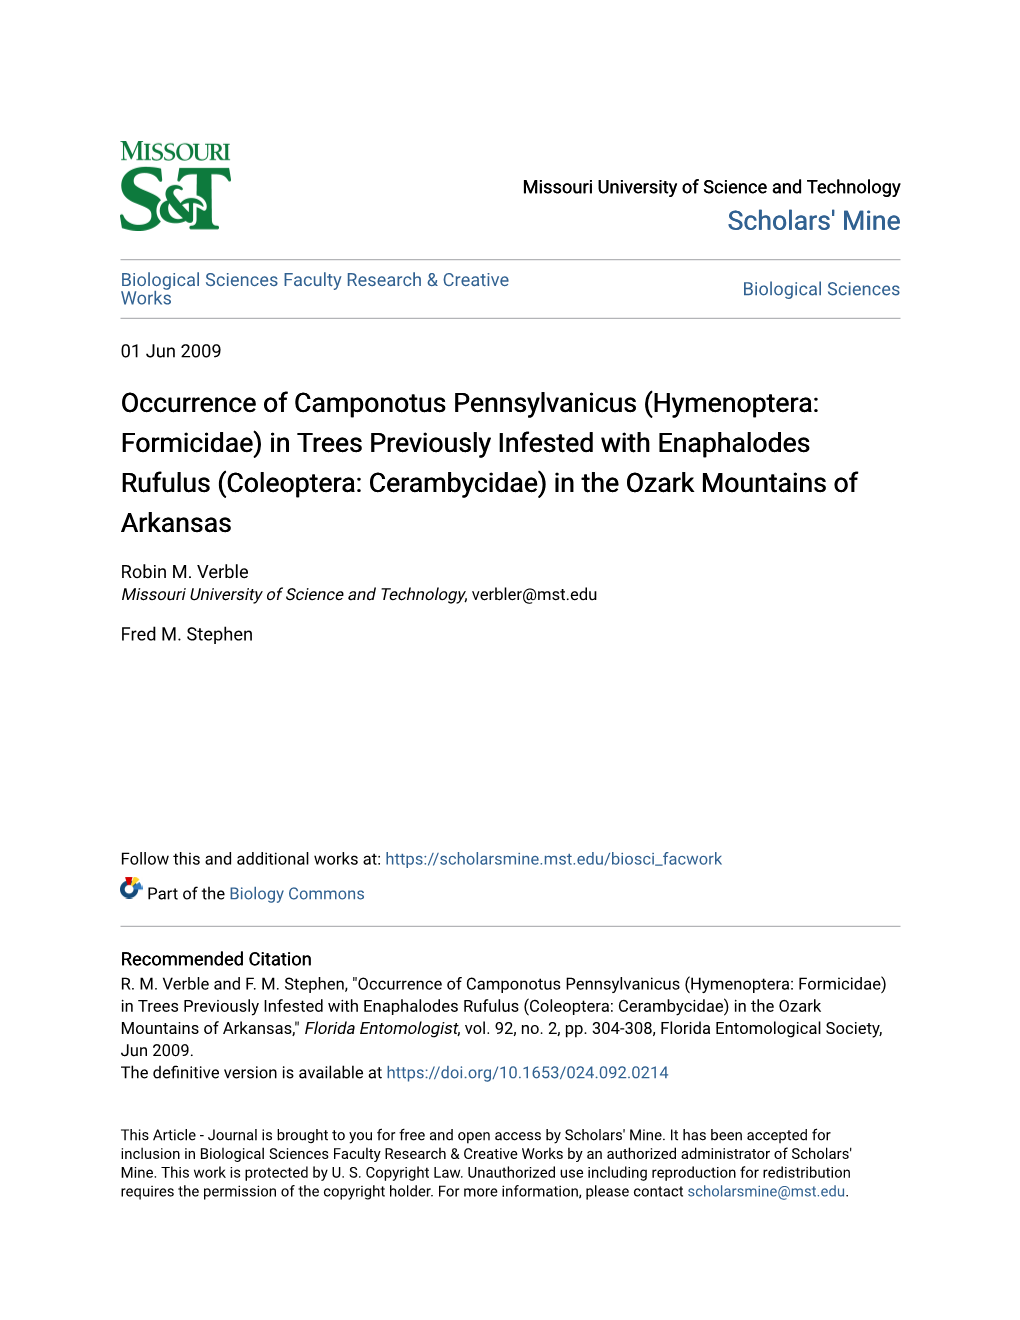 Occurrence of Camponotus Pennsylvanicus (Hymenoptera: Formicidae) in Trees Previously Infested with Enaphalodes Rufulus (Coleopt